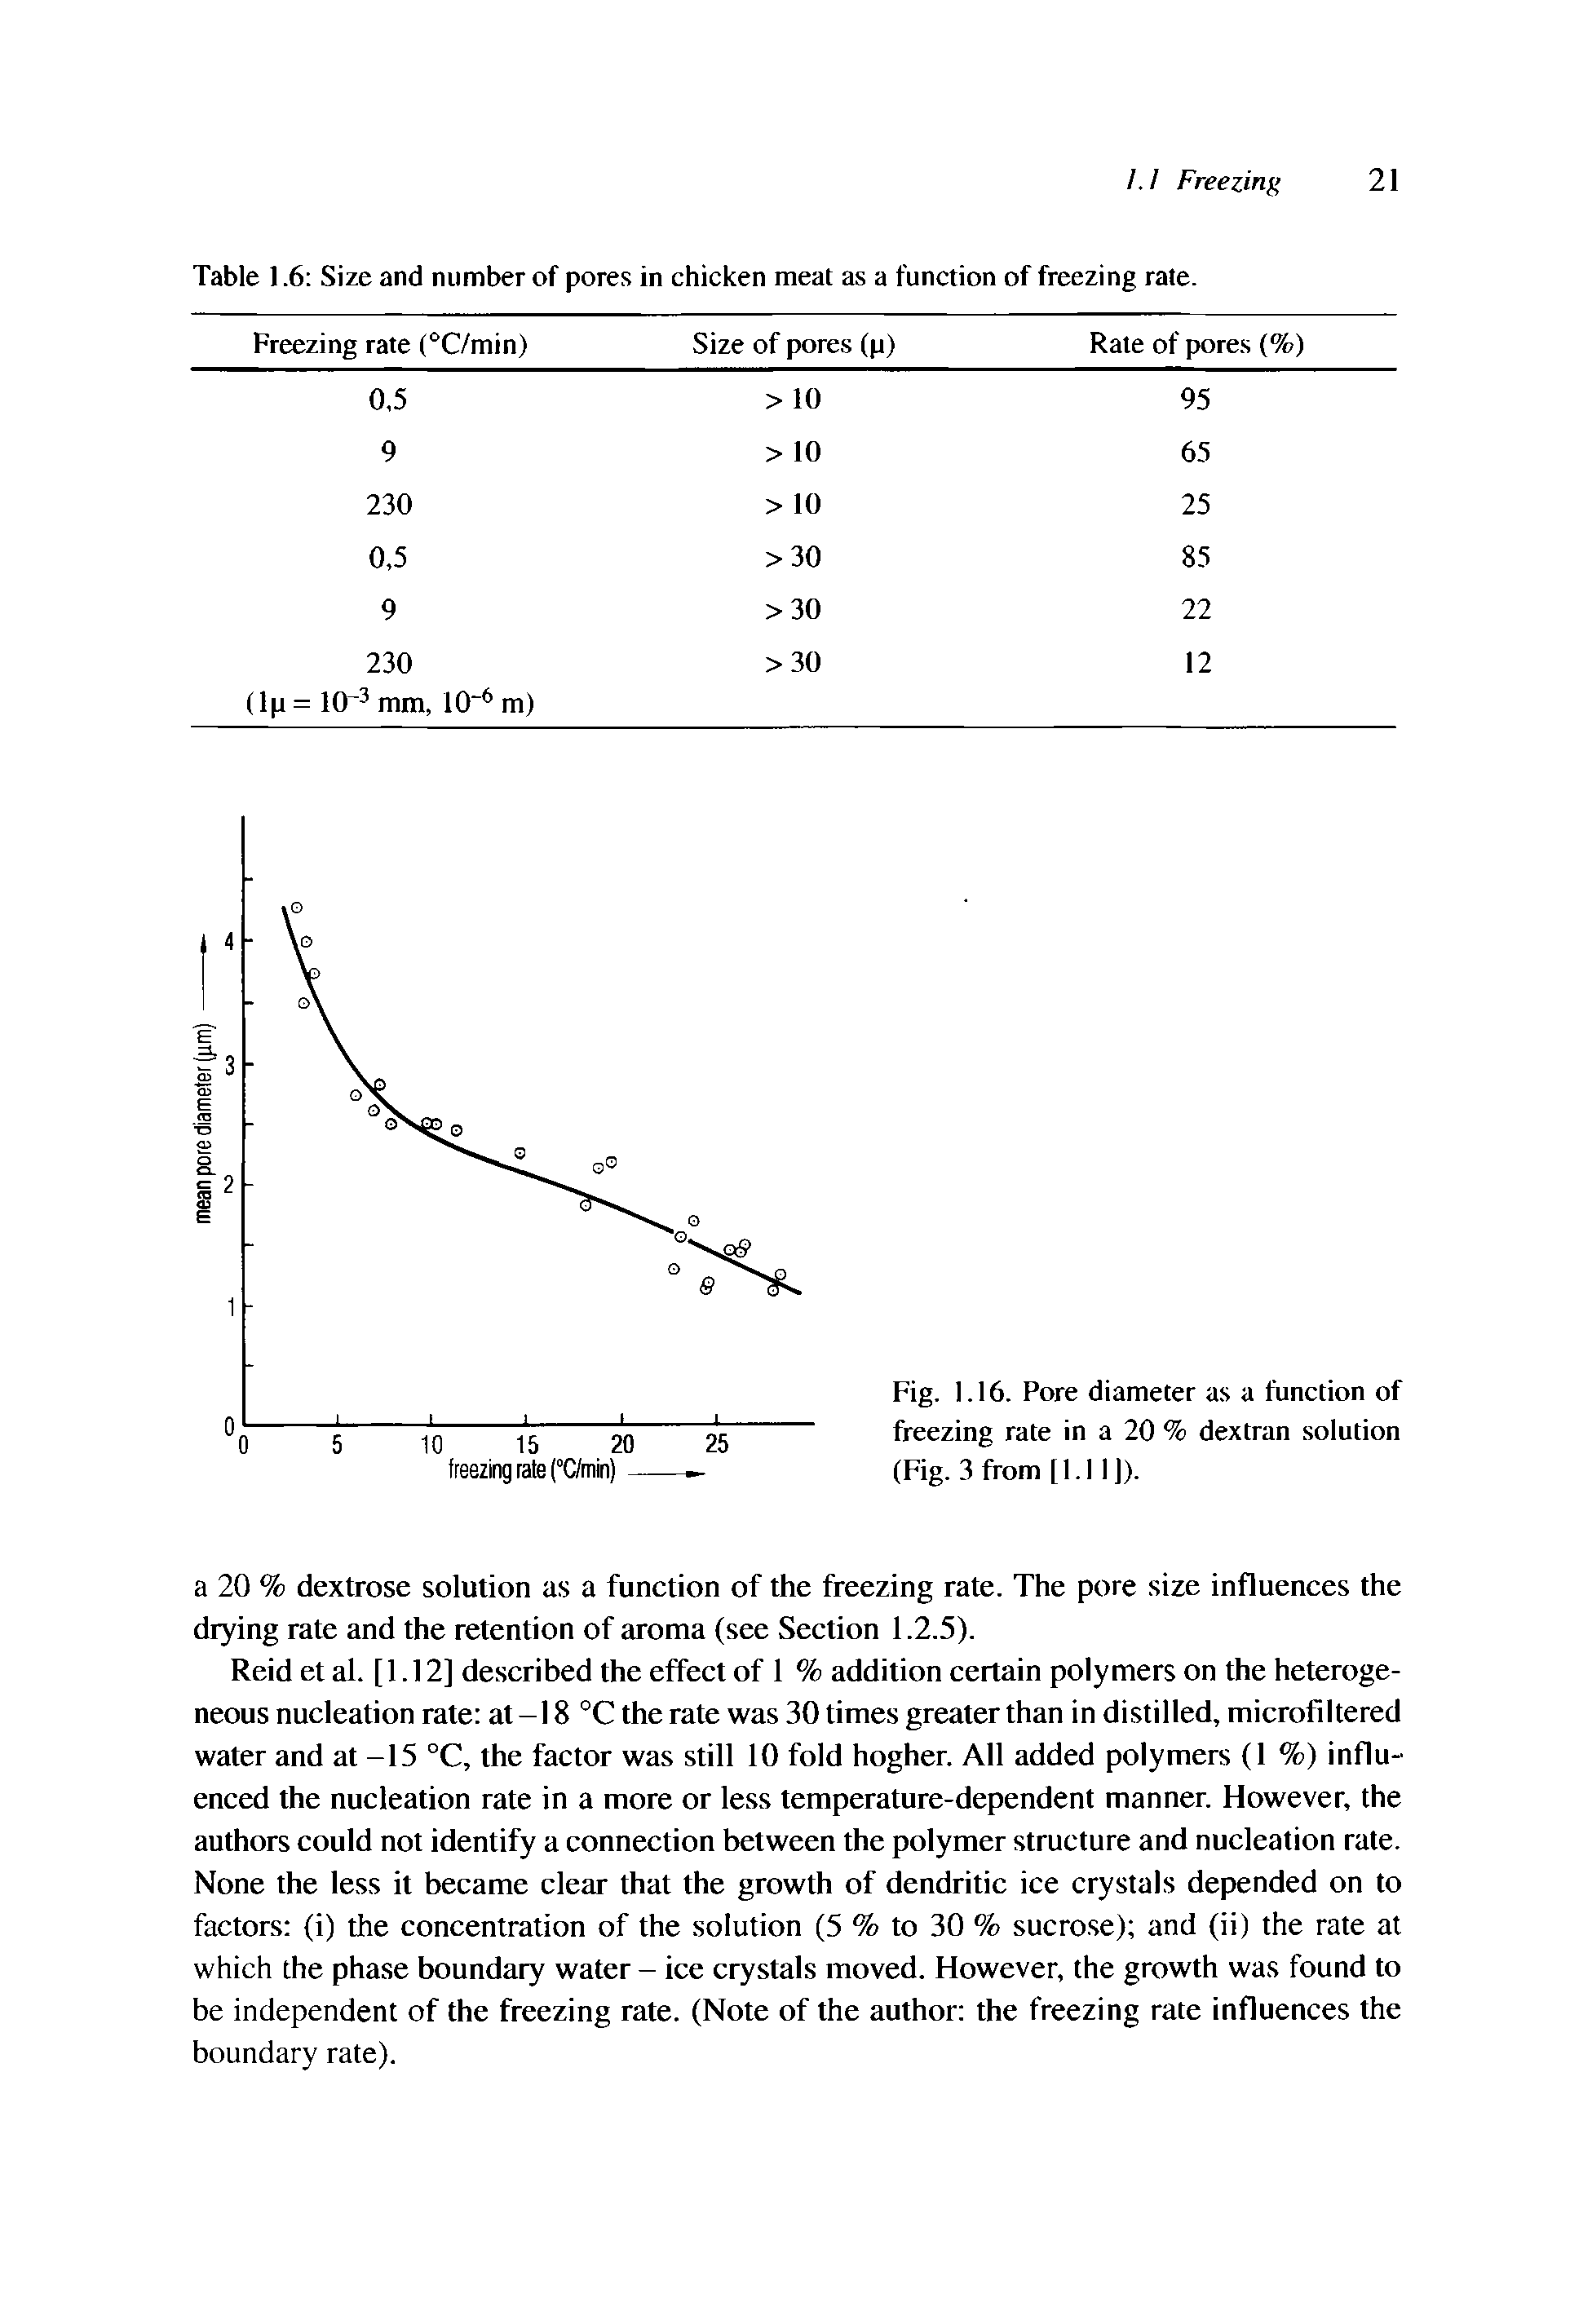 Fig. 1.16. Pore diameter as a function of freezing rate in a 20 % dextran solution (Fig. 3 from [1.1 I]).